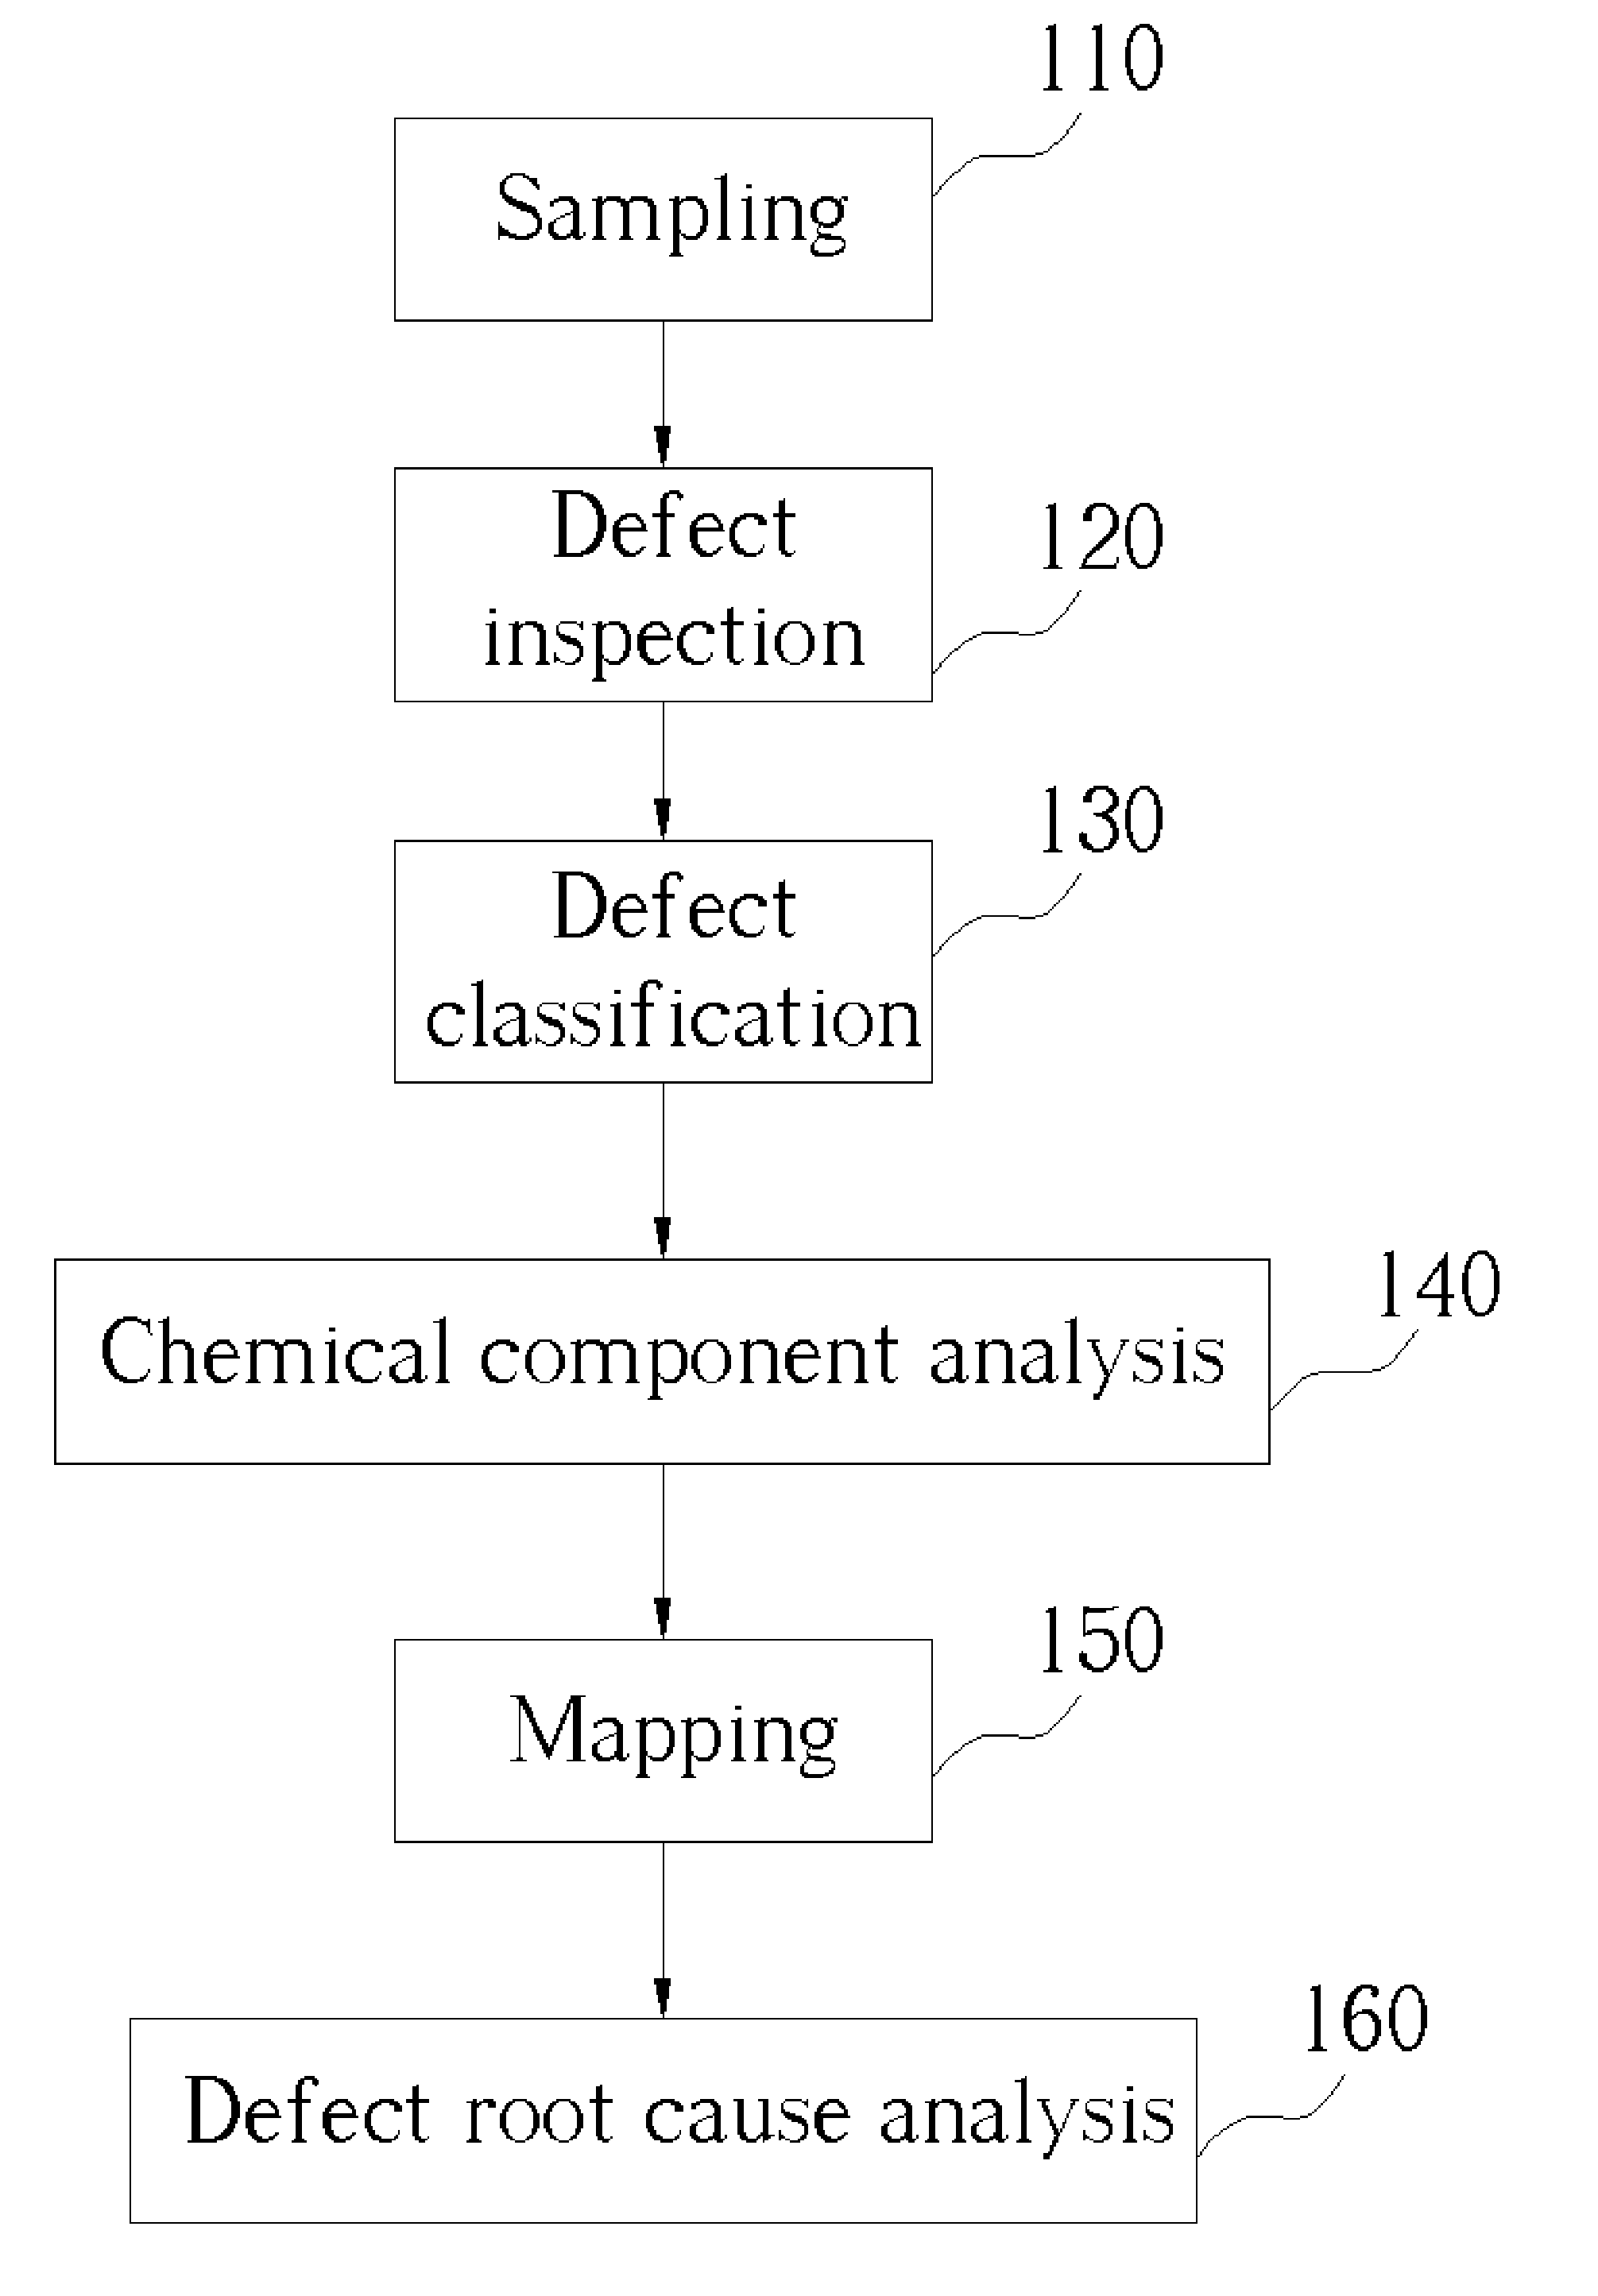 Method of defect root cause analysis